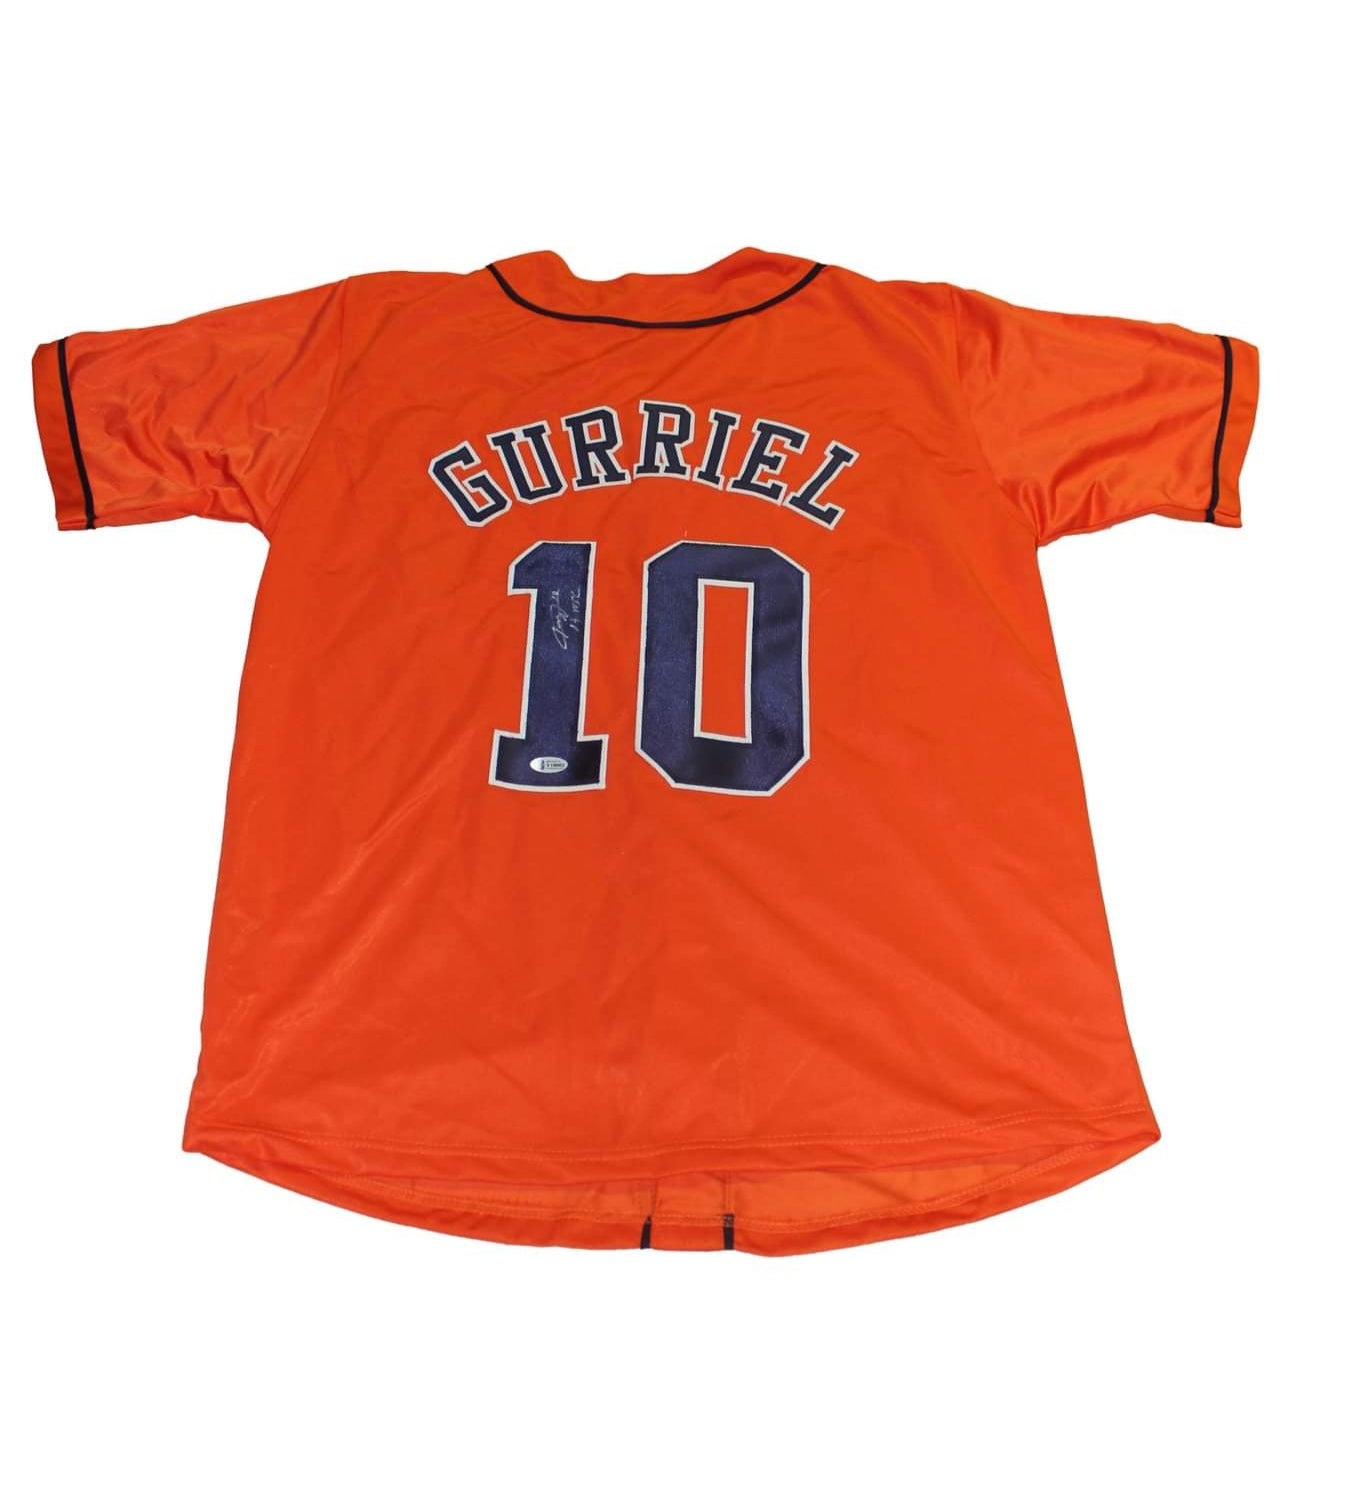 Yuli Gurriel - Signed Jersey - MLB – Crown Collectables